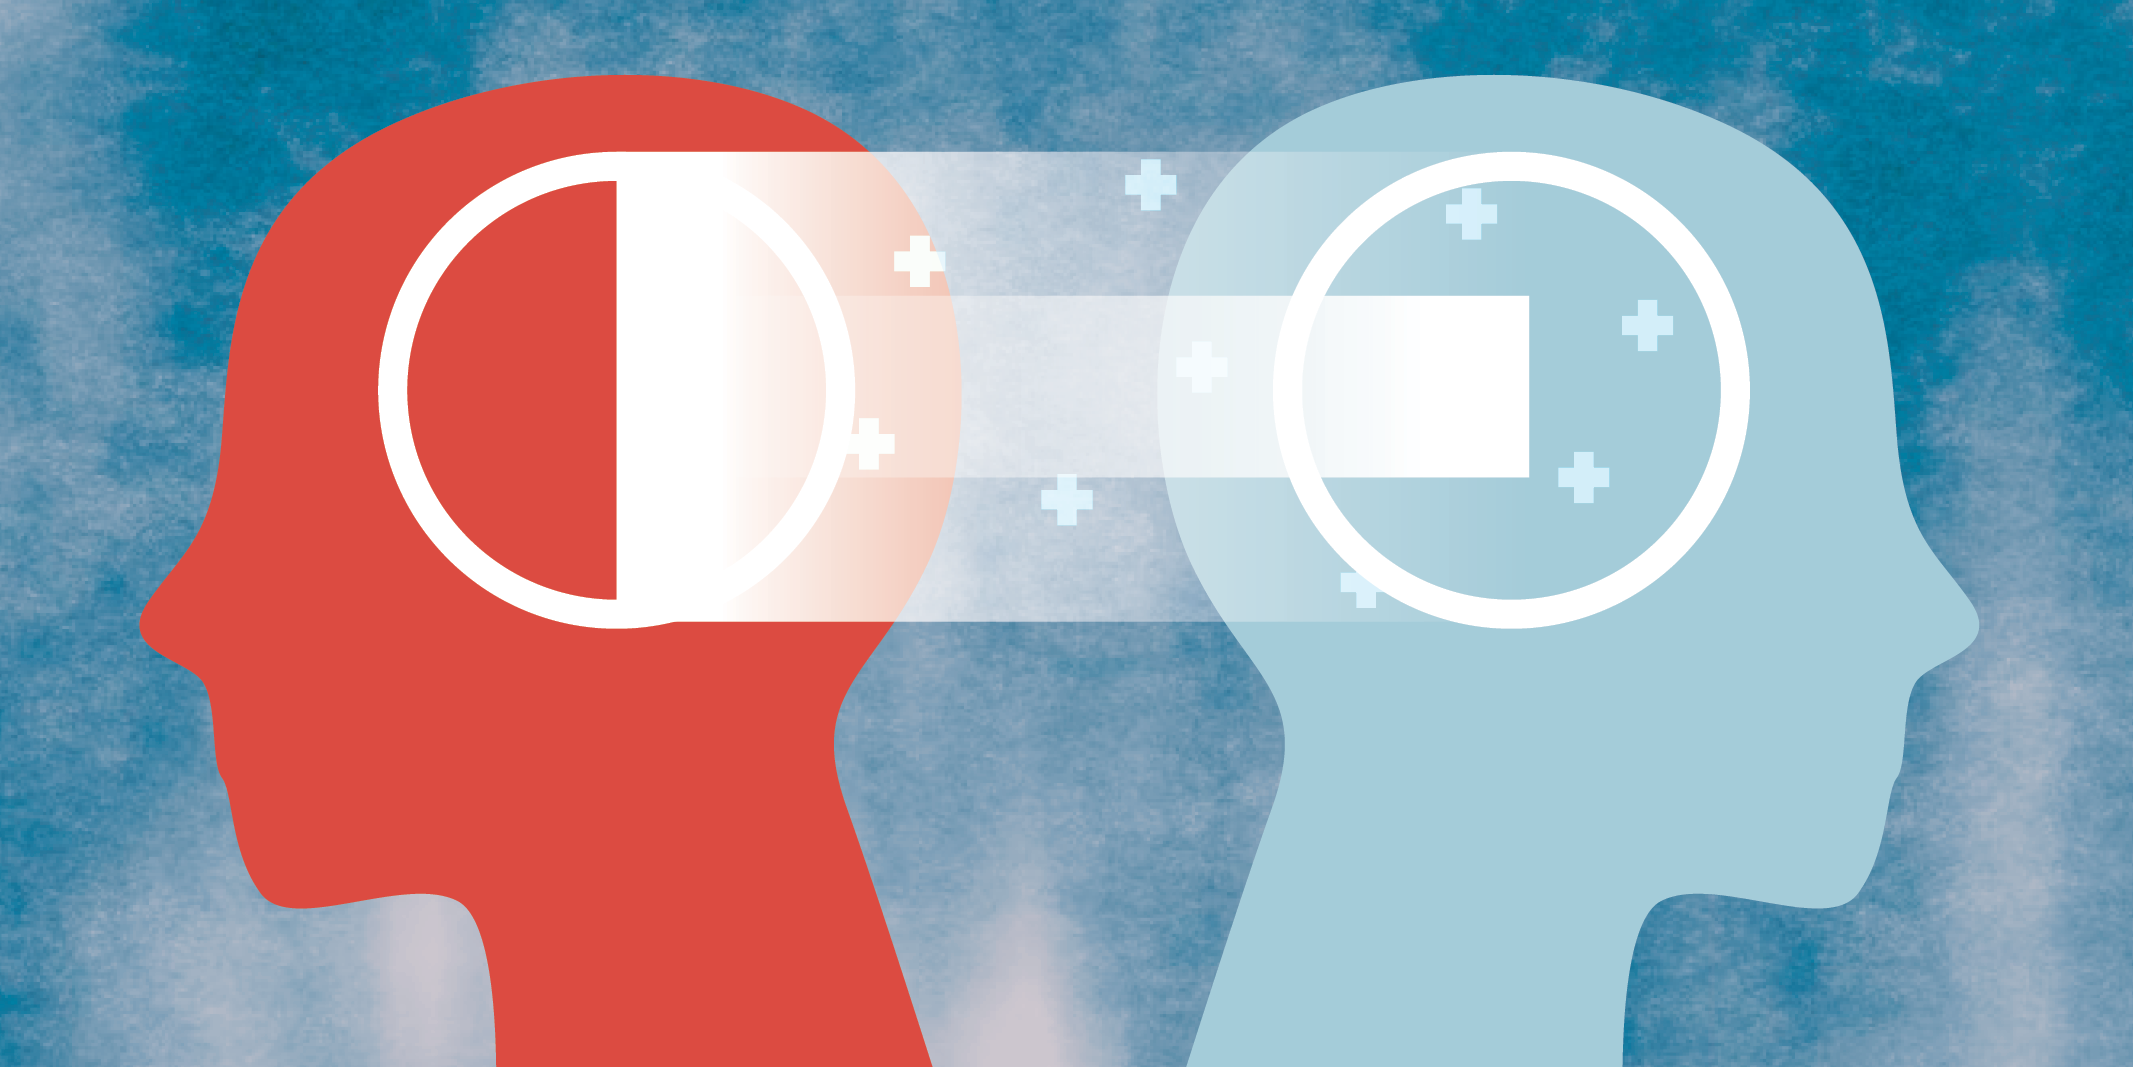 Illustration of two silhouetted heads connecting (representative of telecebo, or the exteriorization of the intentions, thoughts, or emotions of a clinician toward a patient)